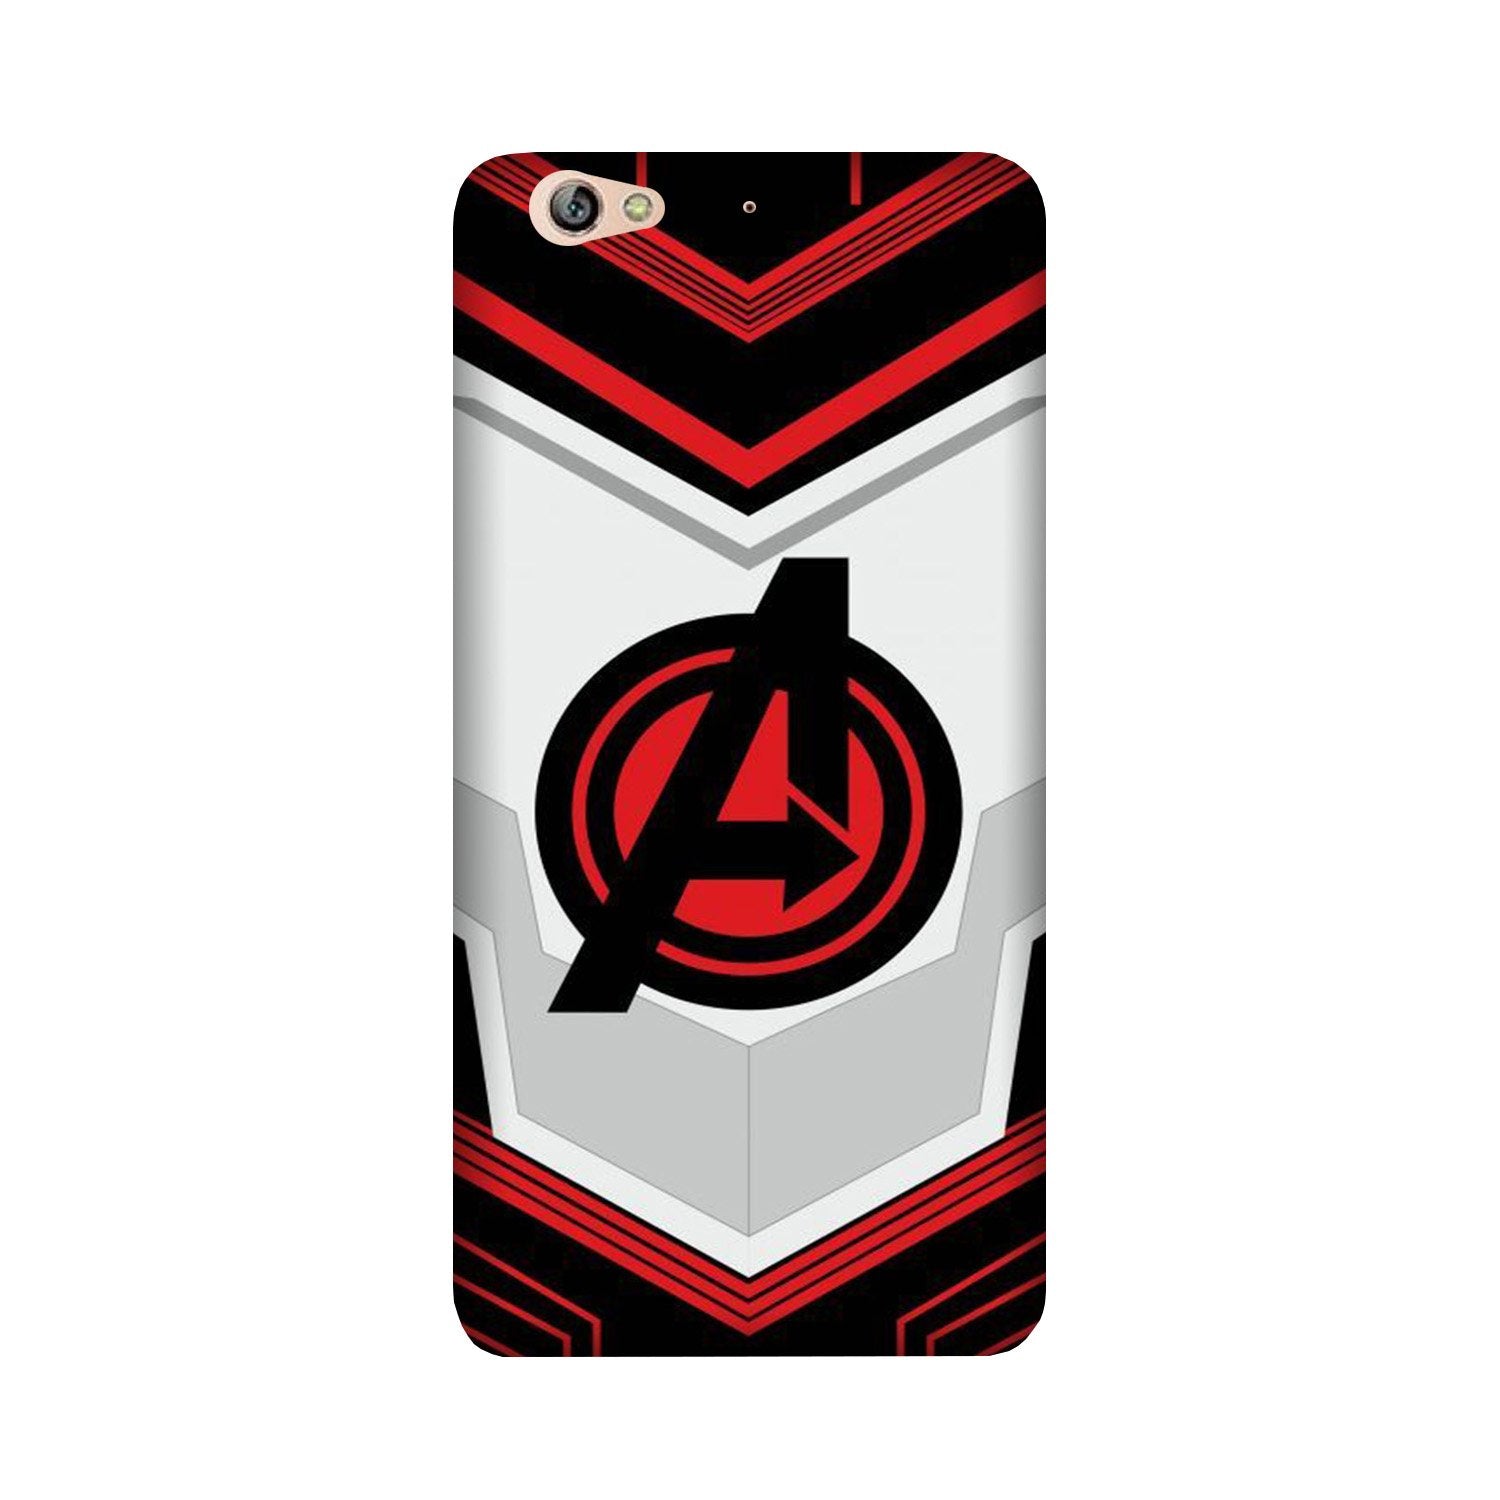 Avengers2 Case for Gionee S6 (Design No. 255)